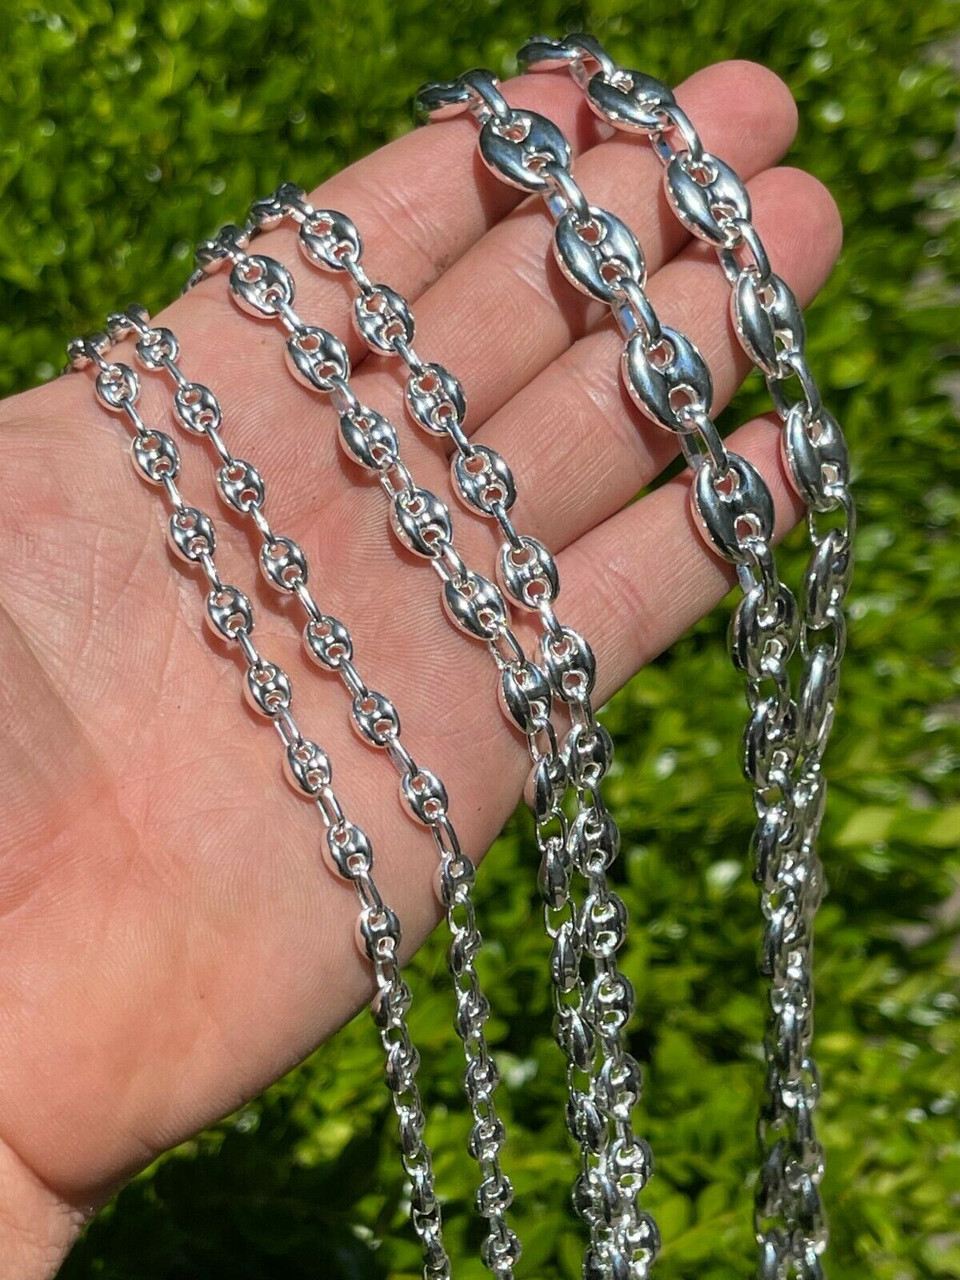 925 Sterling Silver Puffed Gucci Mariner Chain Necklace Bracelet 6-12mm